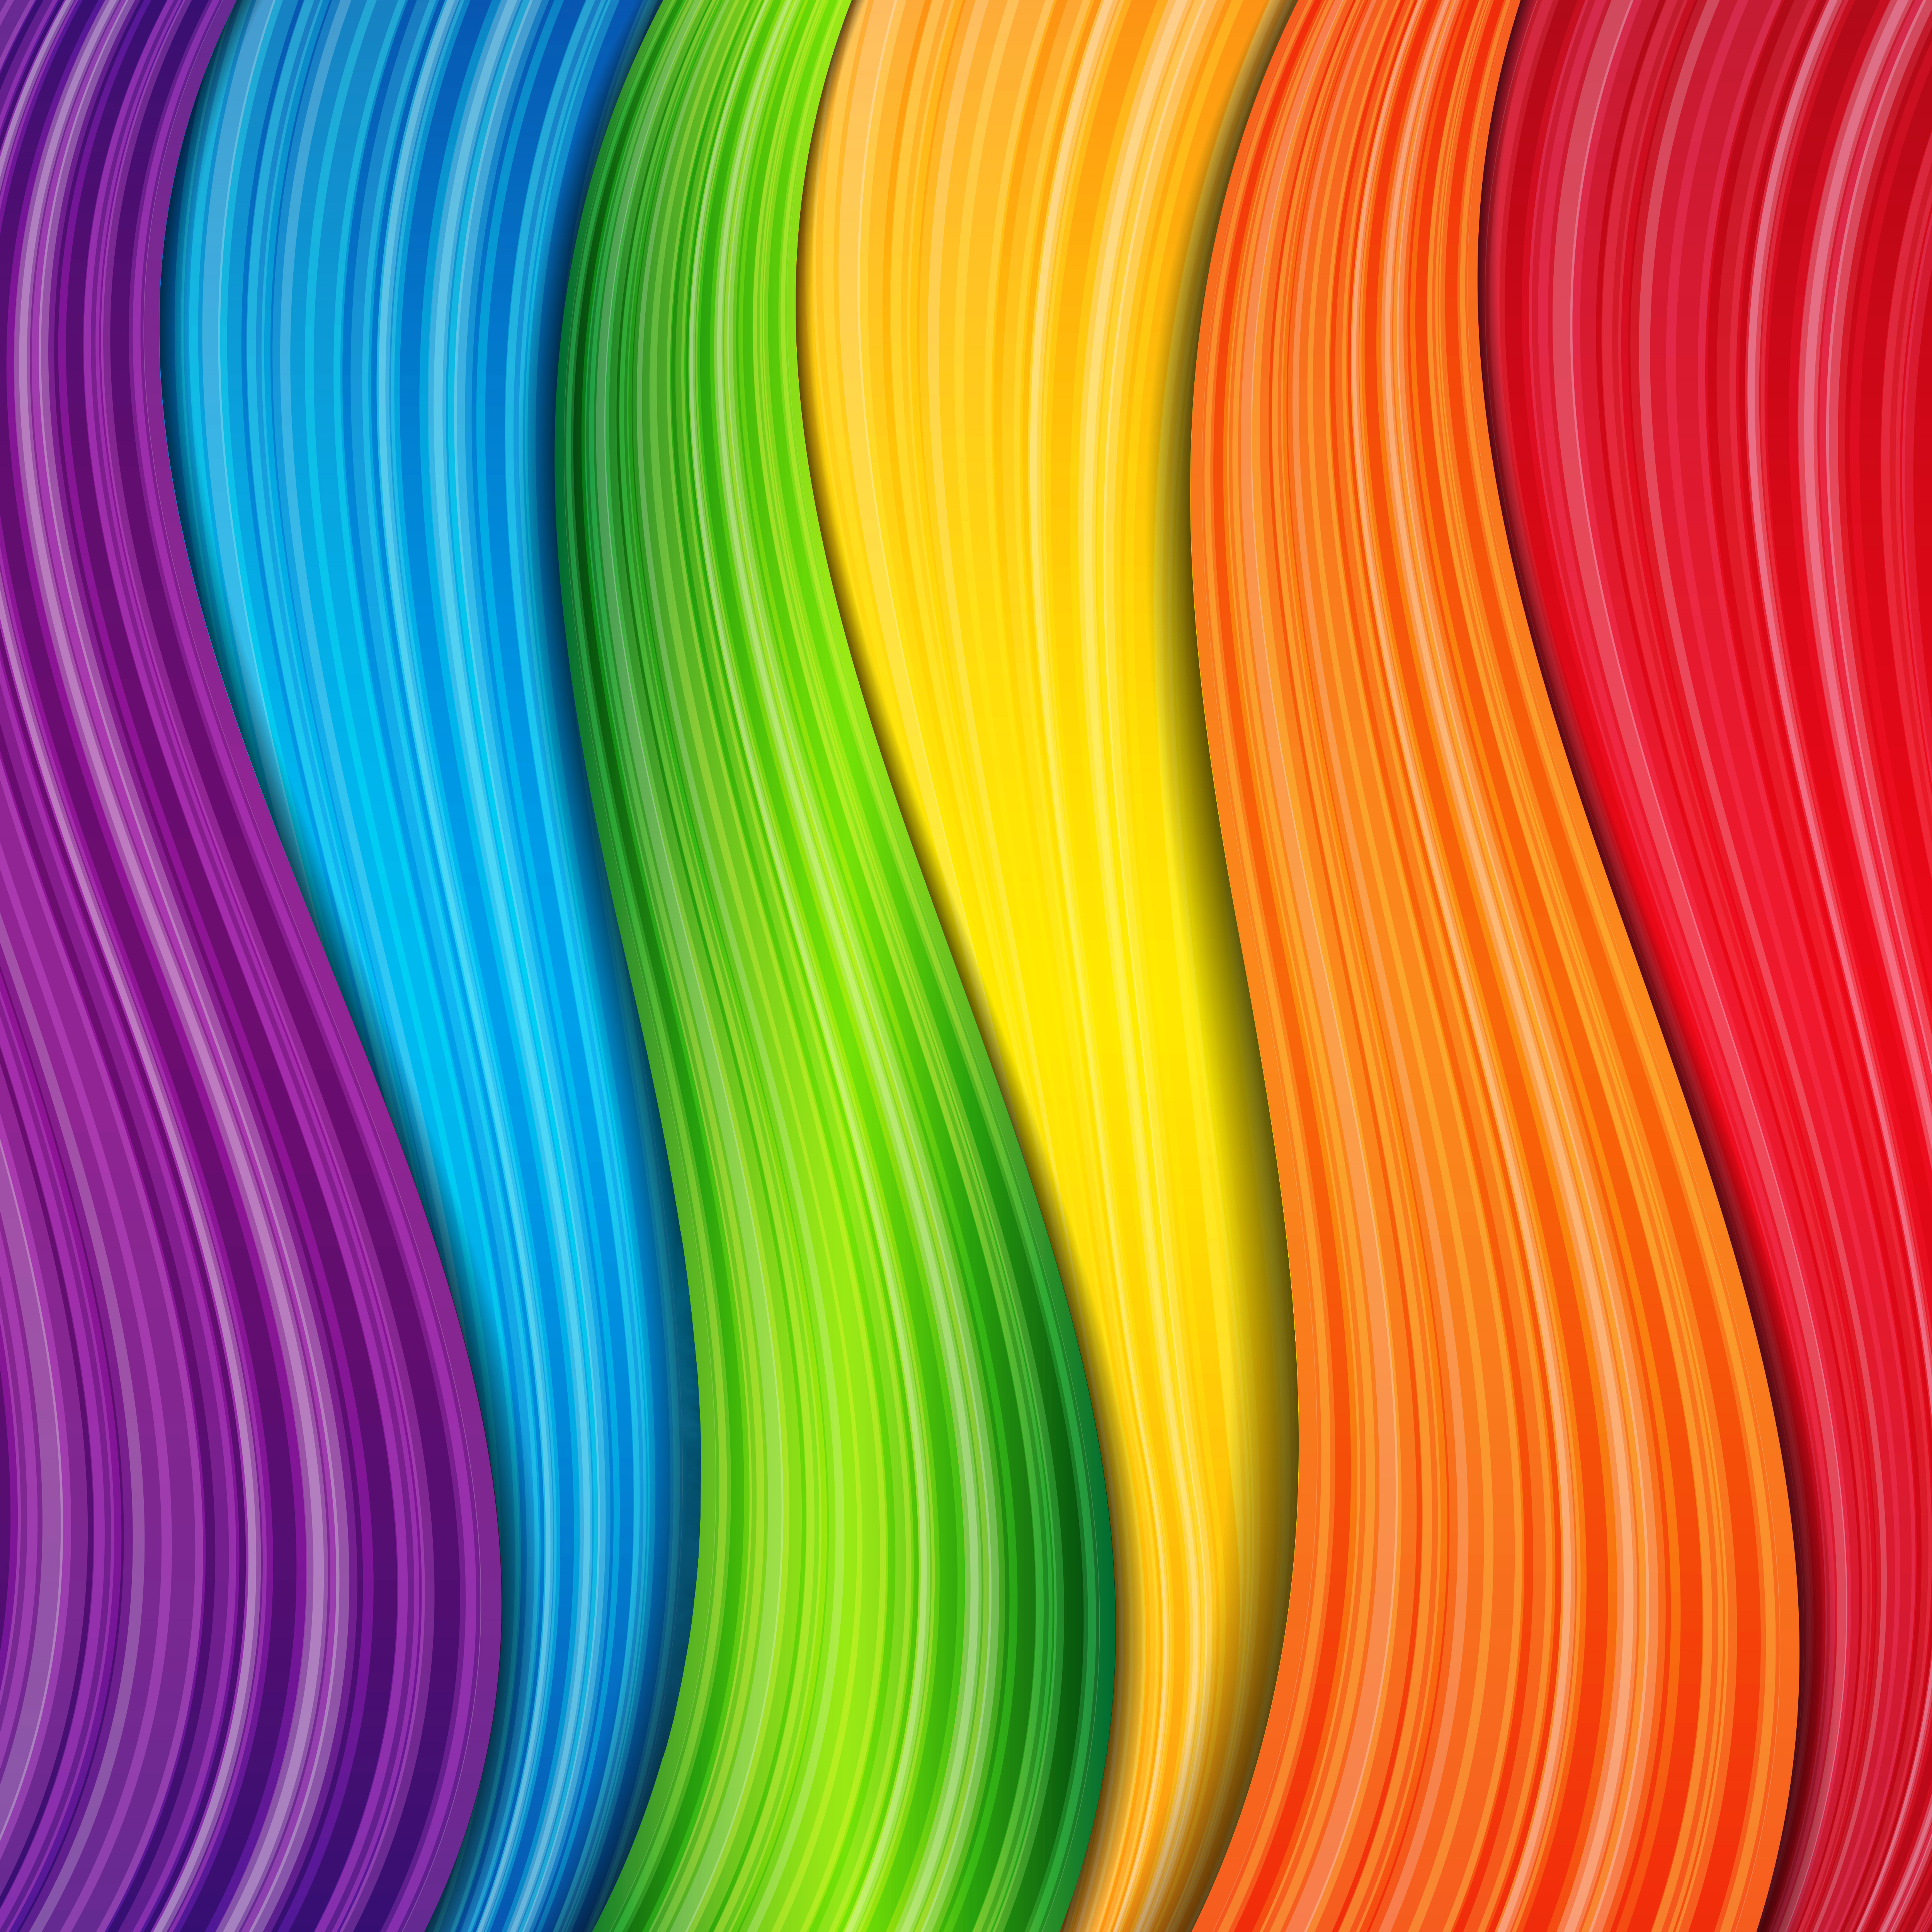 Colorful Rainbow Background | Gallery Yopriceville - High-Quality ...